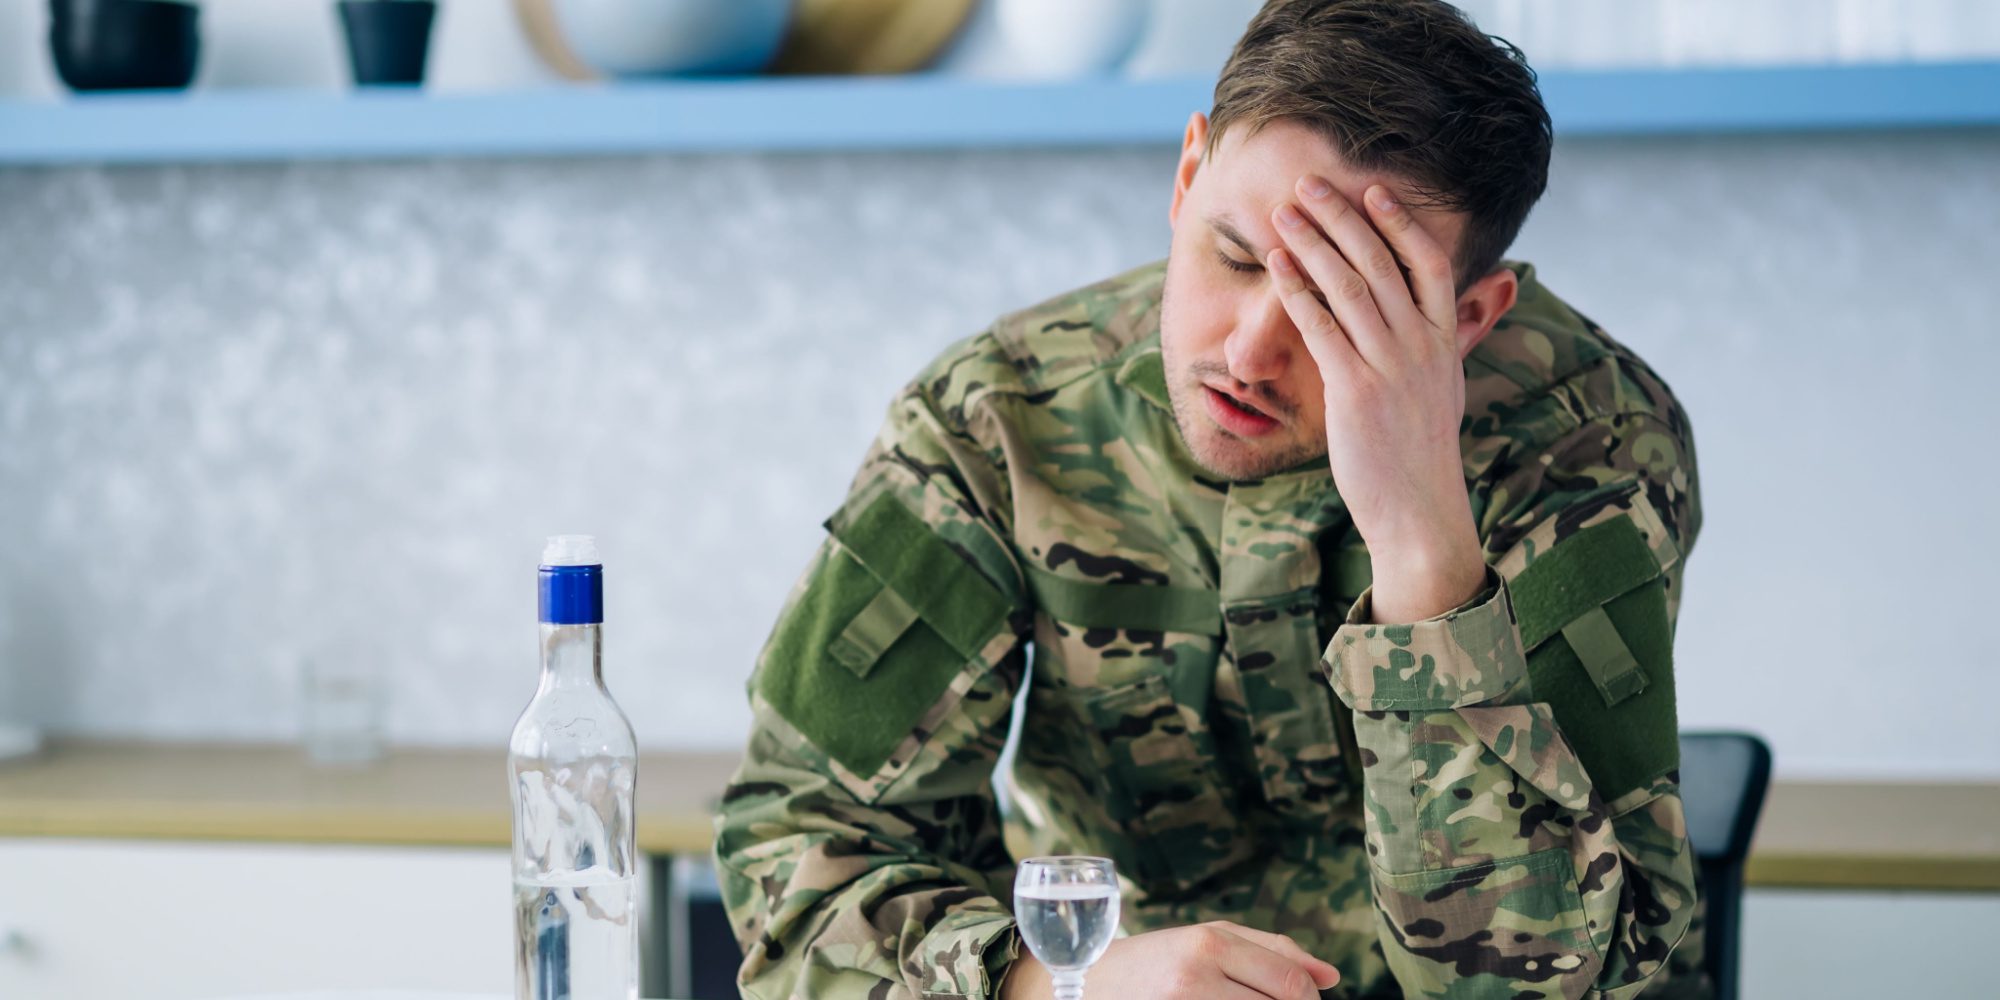 Alcohol and Anxiety: What Veterans Need to Know